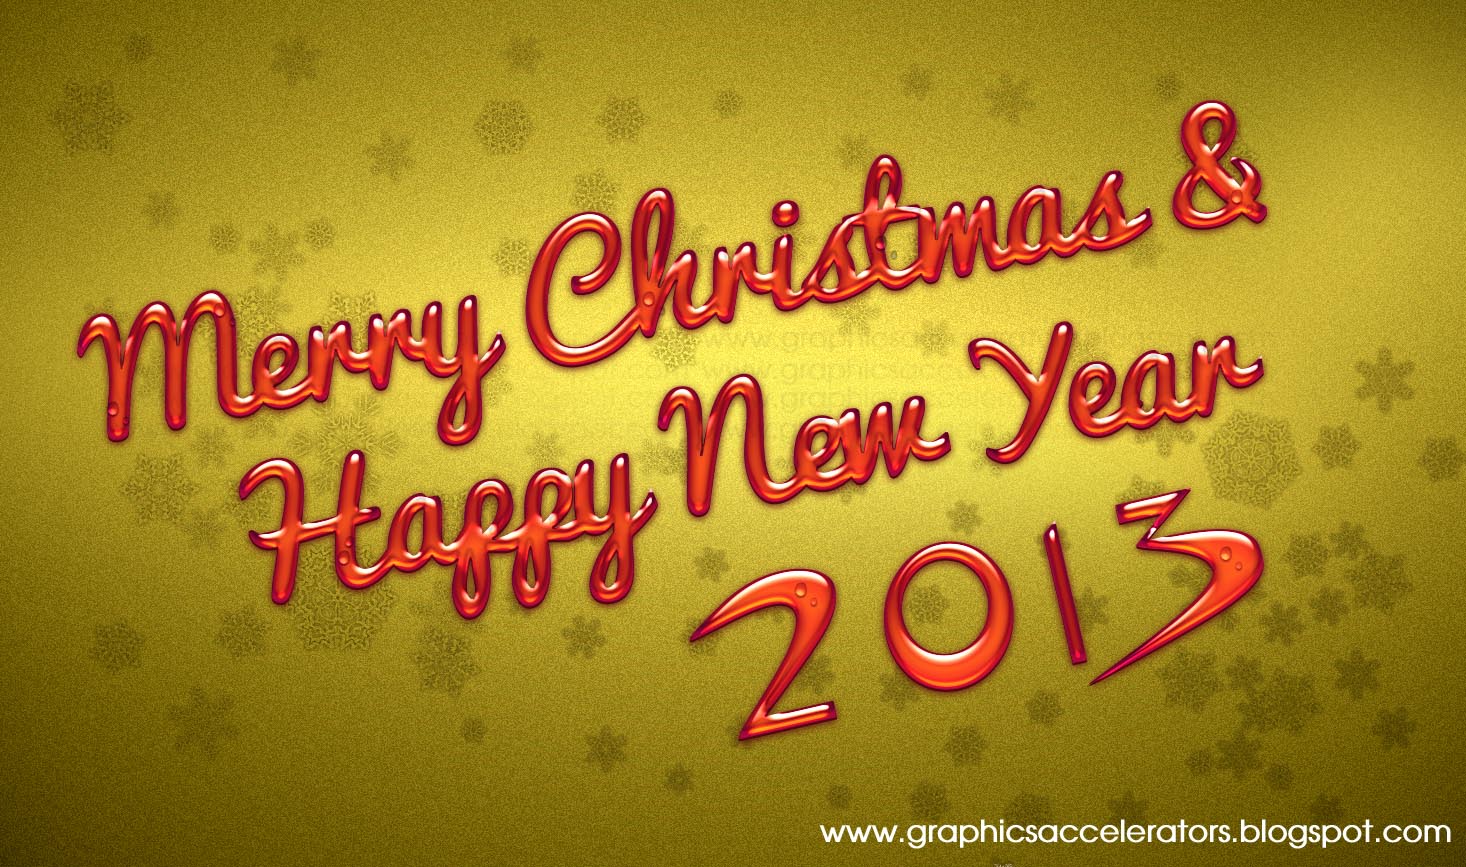 Happy_New_Year+2013_+and+_Merry+Christmas.jpg